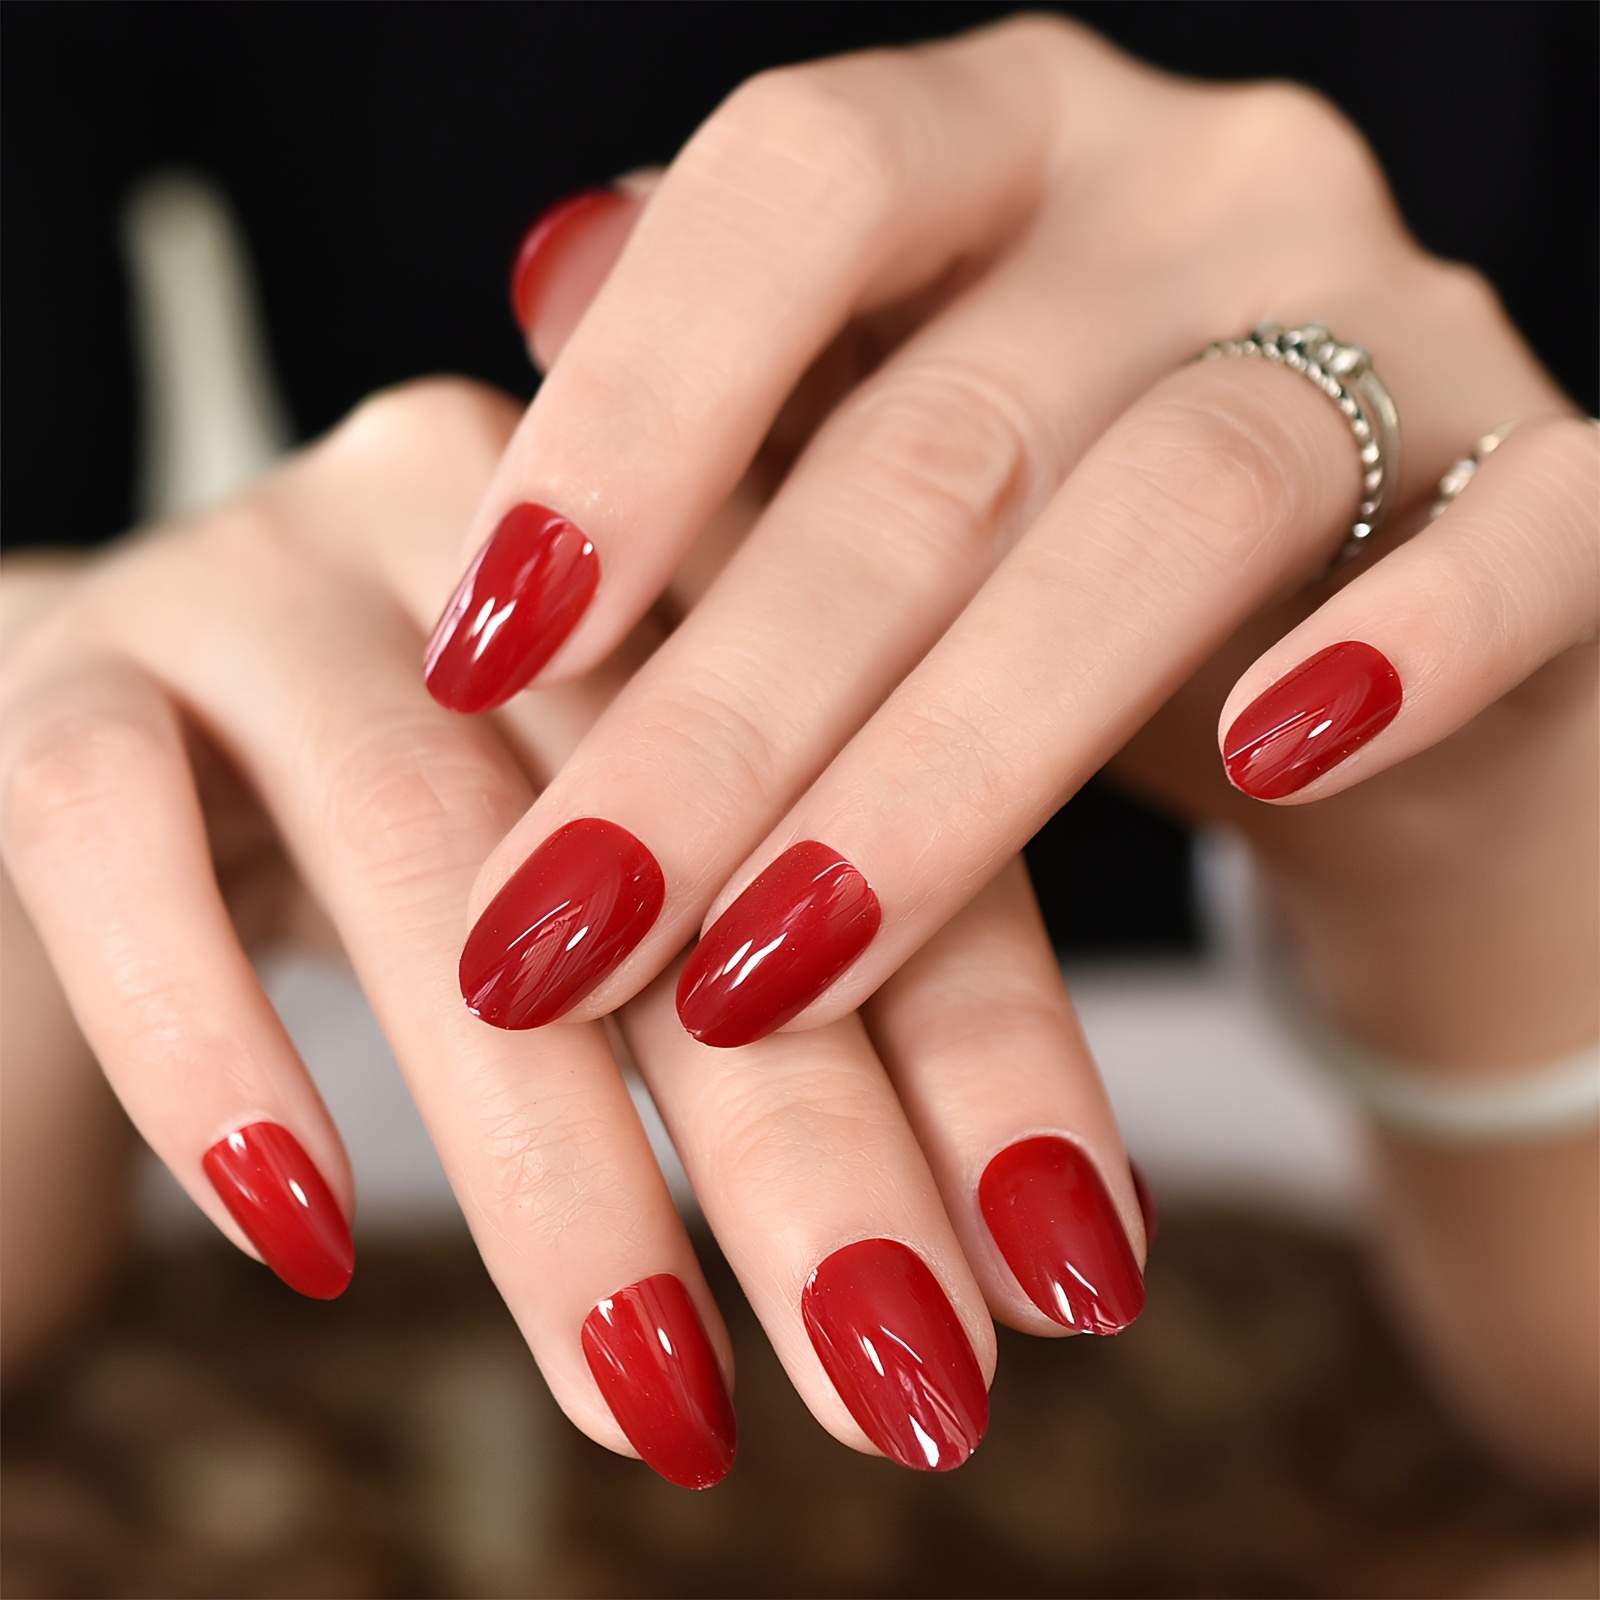 

24pcs Glossy Bright Red Press On Nails Short Oval Fake Nails Minimalist Style False Nails Solid Color Full Cover Fake Nails For Women Girls Daily Wear